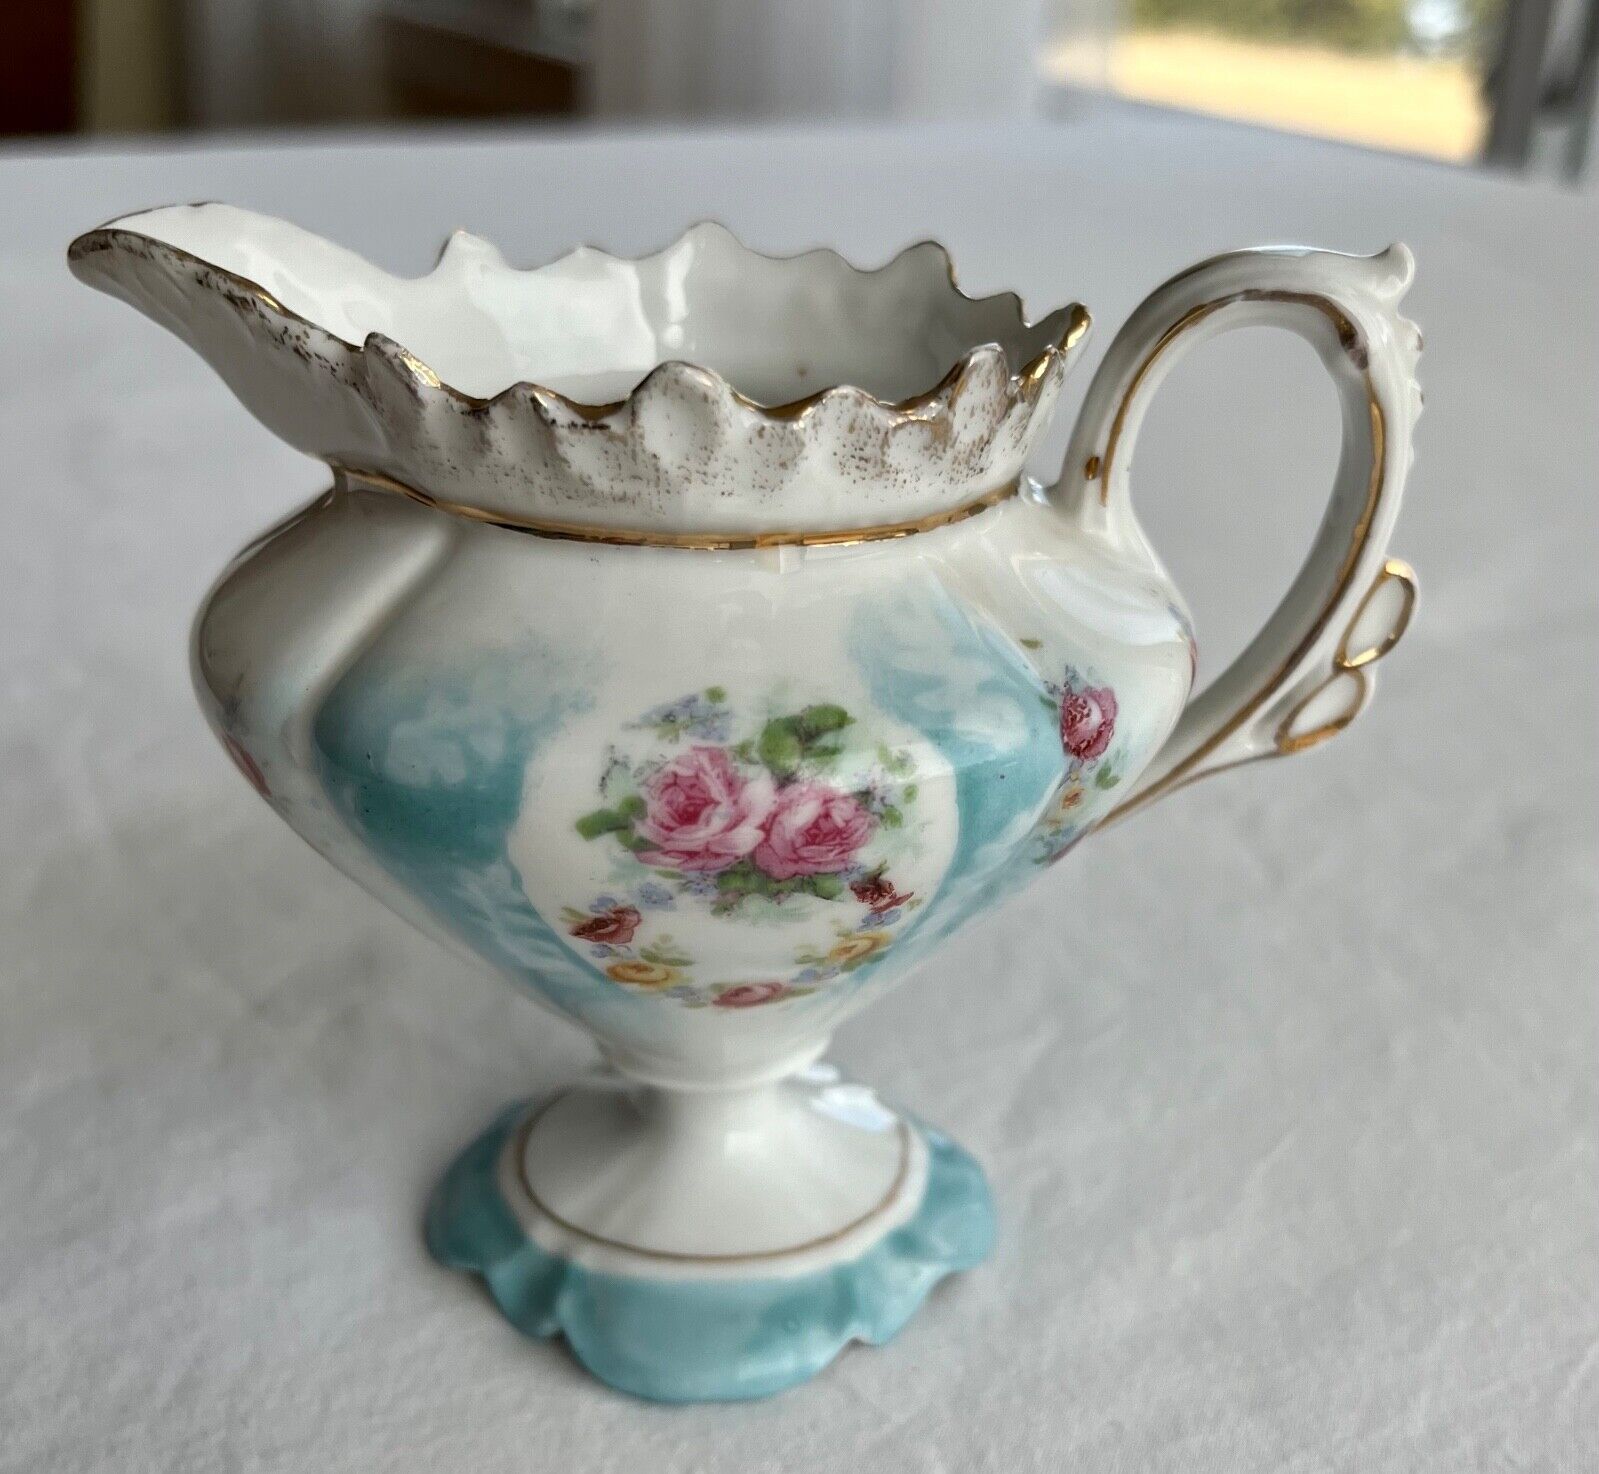 Antique R.S. Prussia Pedestal Creamer Rose Motif Late 1800s -Early 1900s Germany